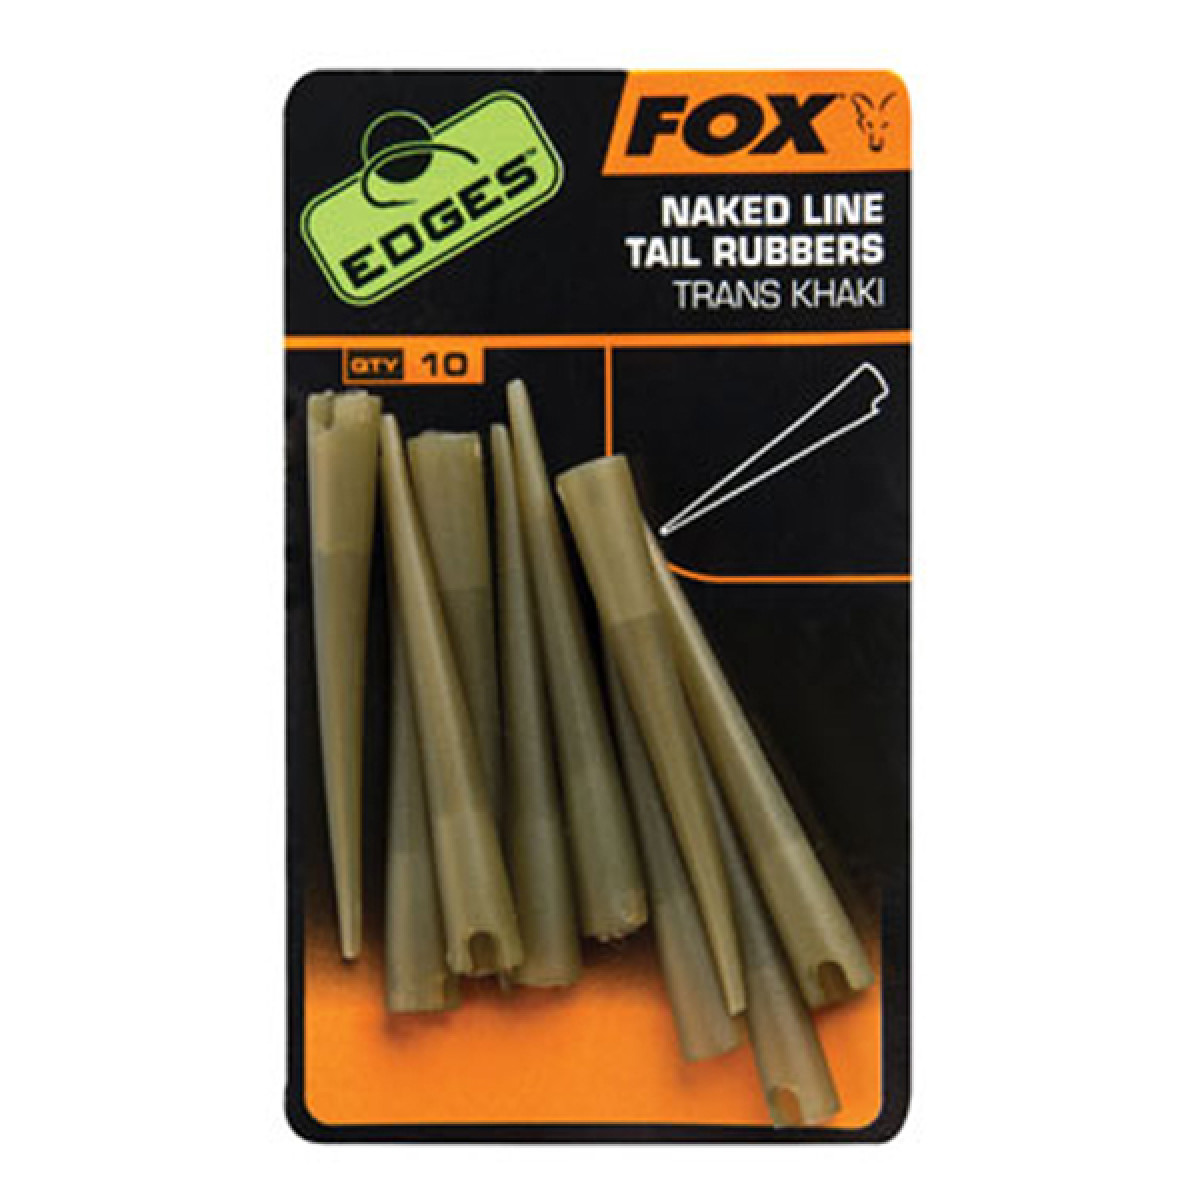 FOX NAKED LINE TAIL RUBBERS